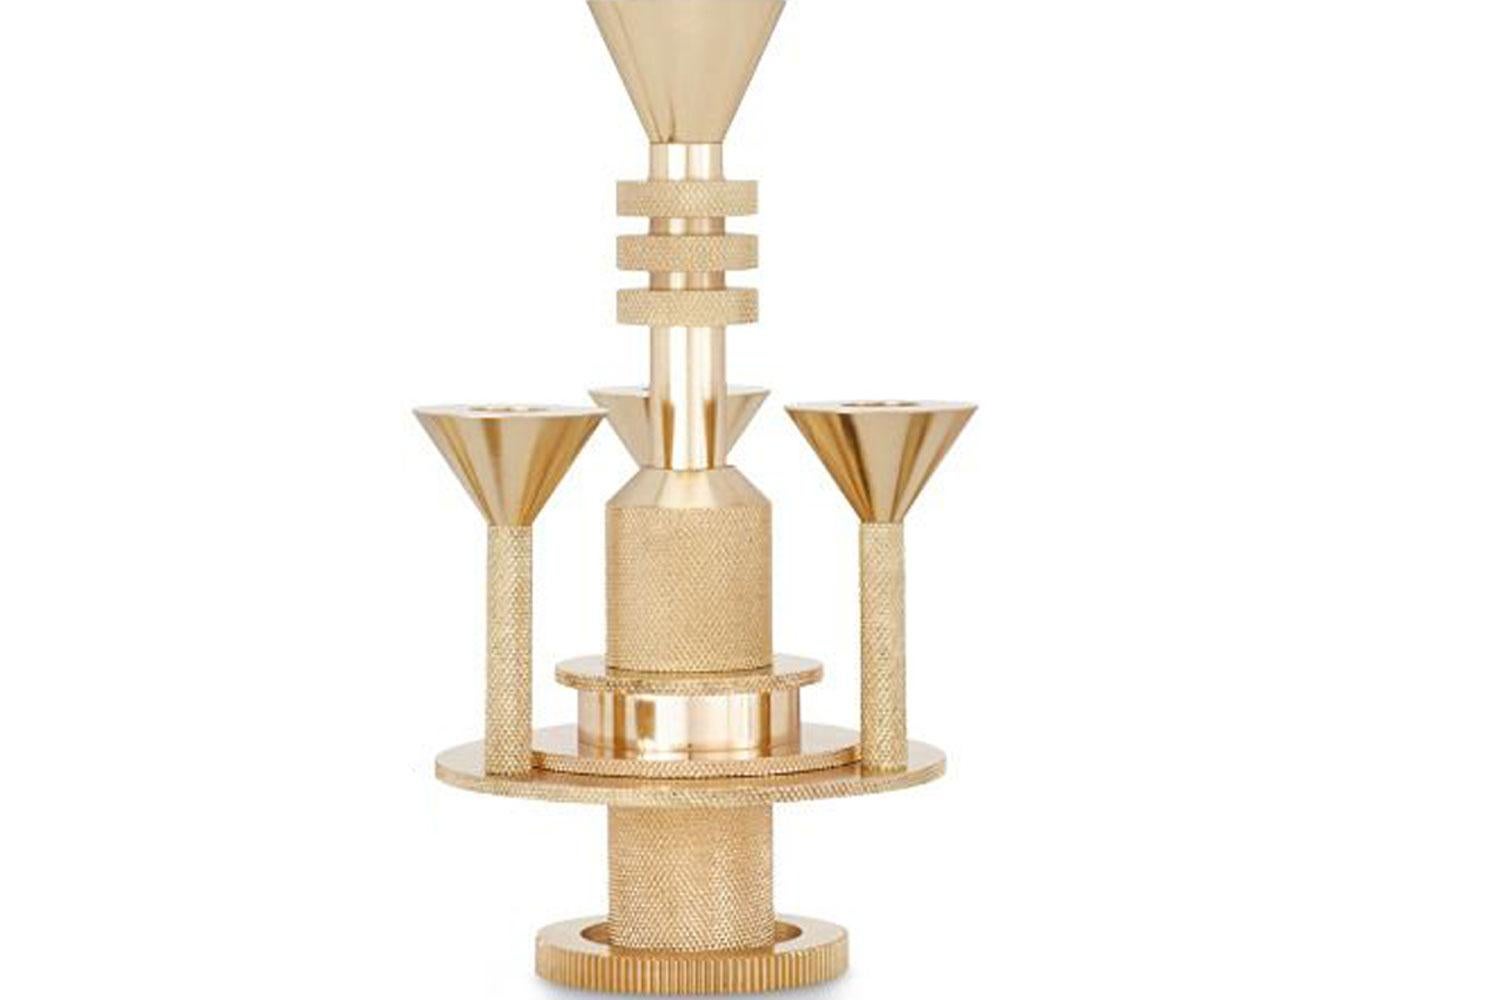 COG candelabra by Tom Dixon

Brass plated solid aluminum cog candelabra candleholder is part of the iconic and Industrial inspired cog collection from Tom Dixon. A super-functional large Cog candle holder, that brings precision manufacturing to